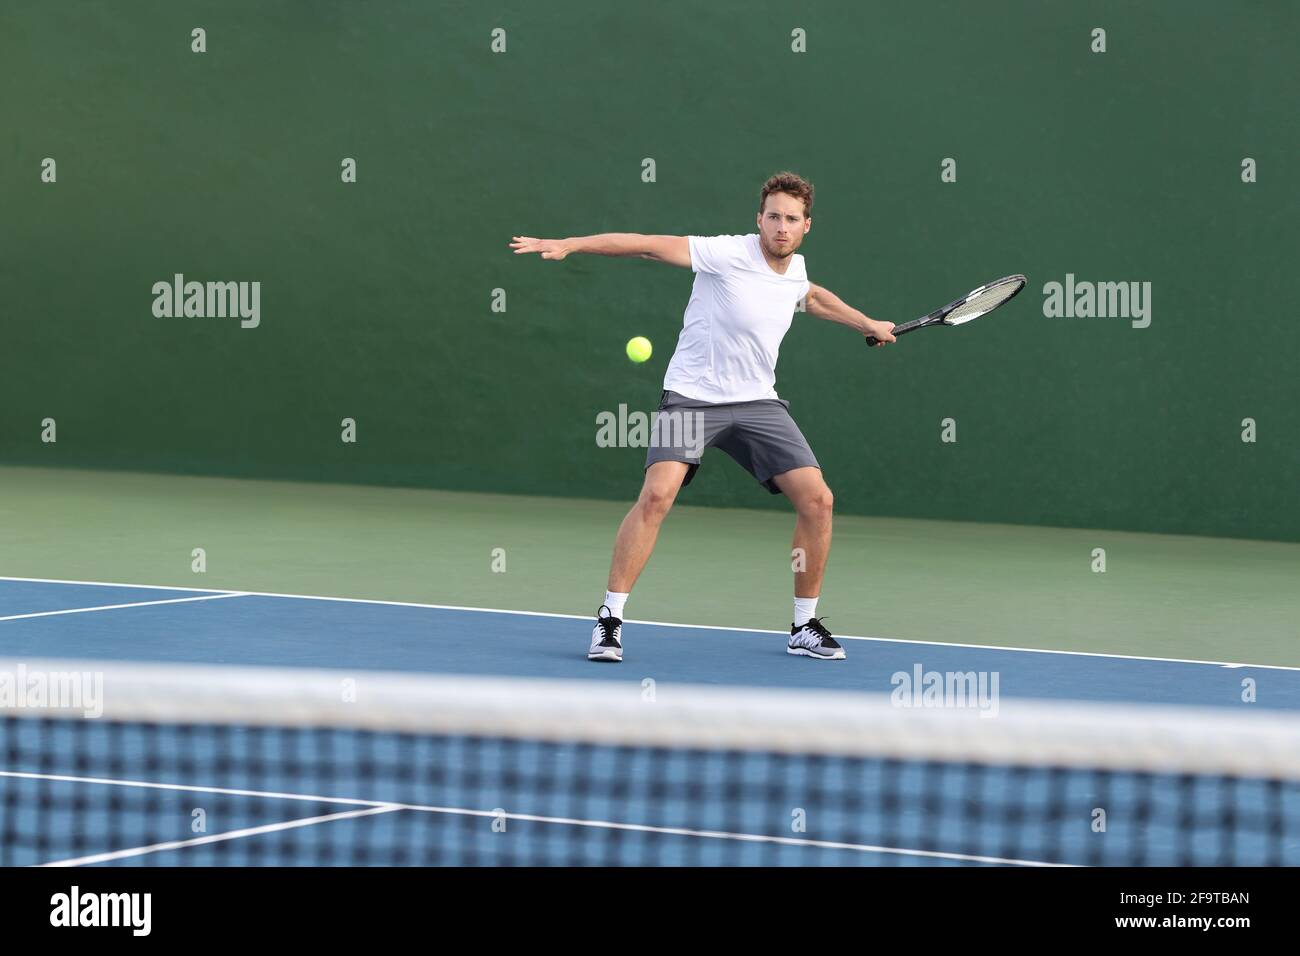 Professional tennis player athlete man focused on hitting ball over net on hard court playing tennis match with someone. Sport game fitness lifestyle Stock Photo